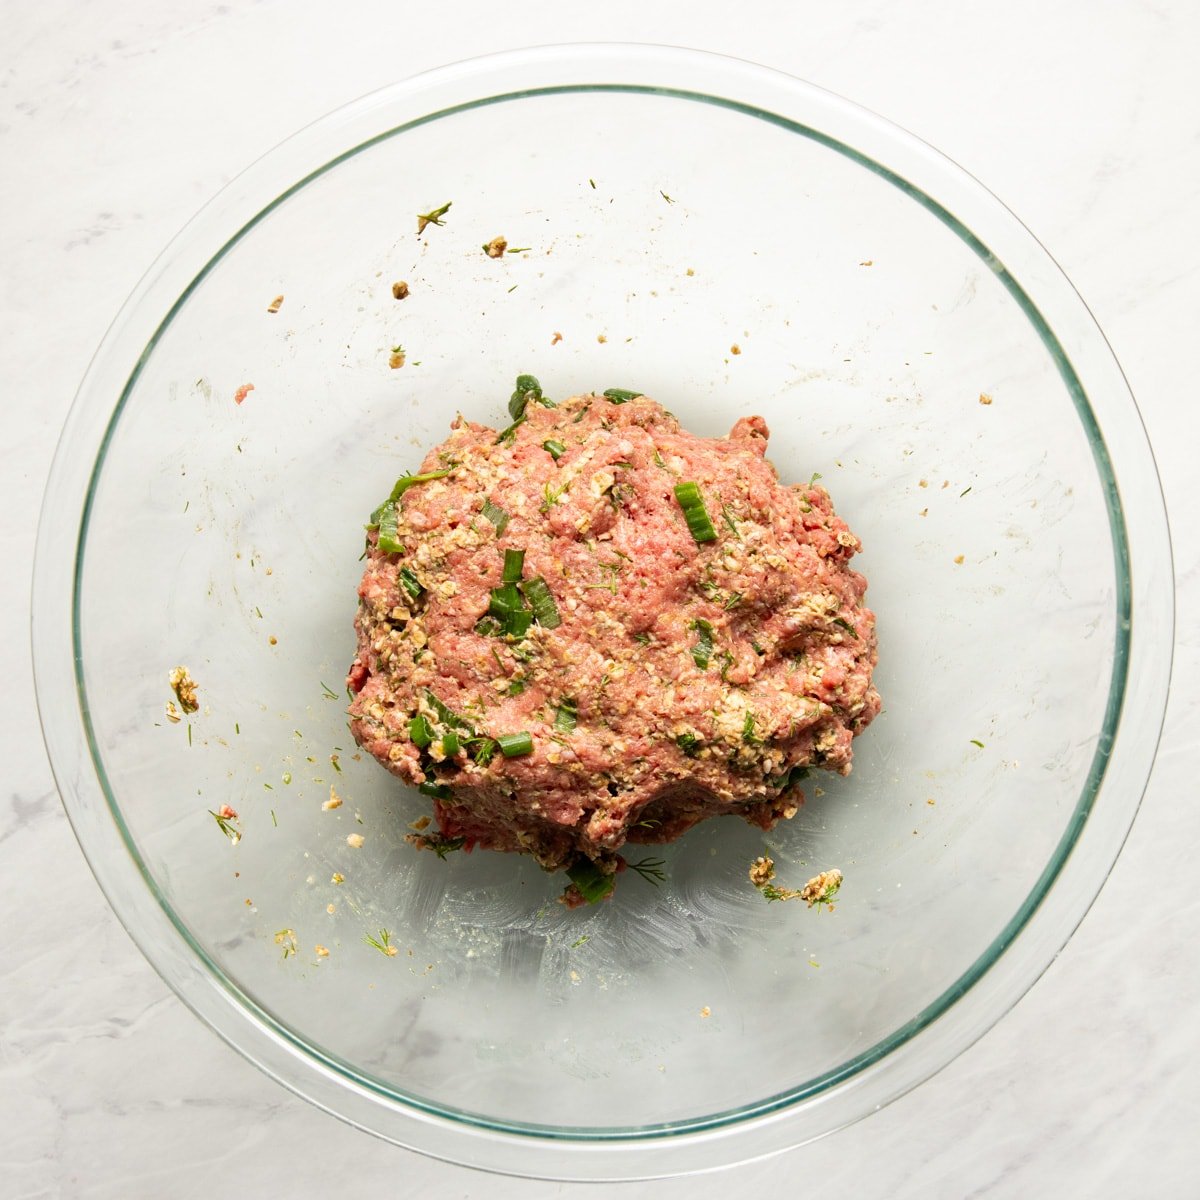 Ground beef mixed with soaked oats, herbs, and spices ready to be rolled into meatballs.